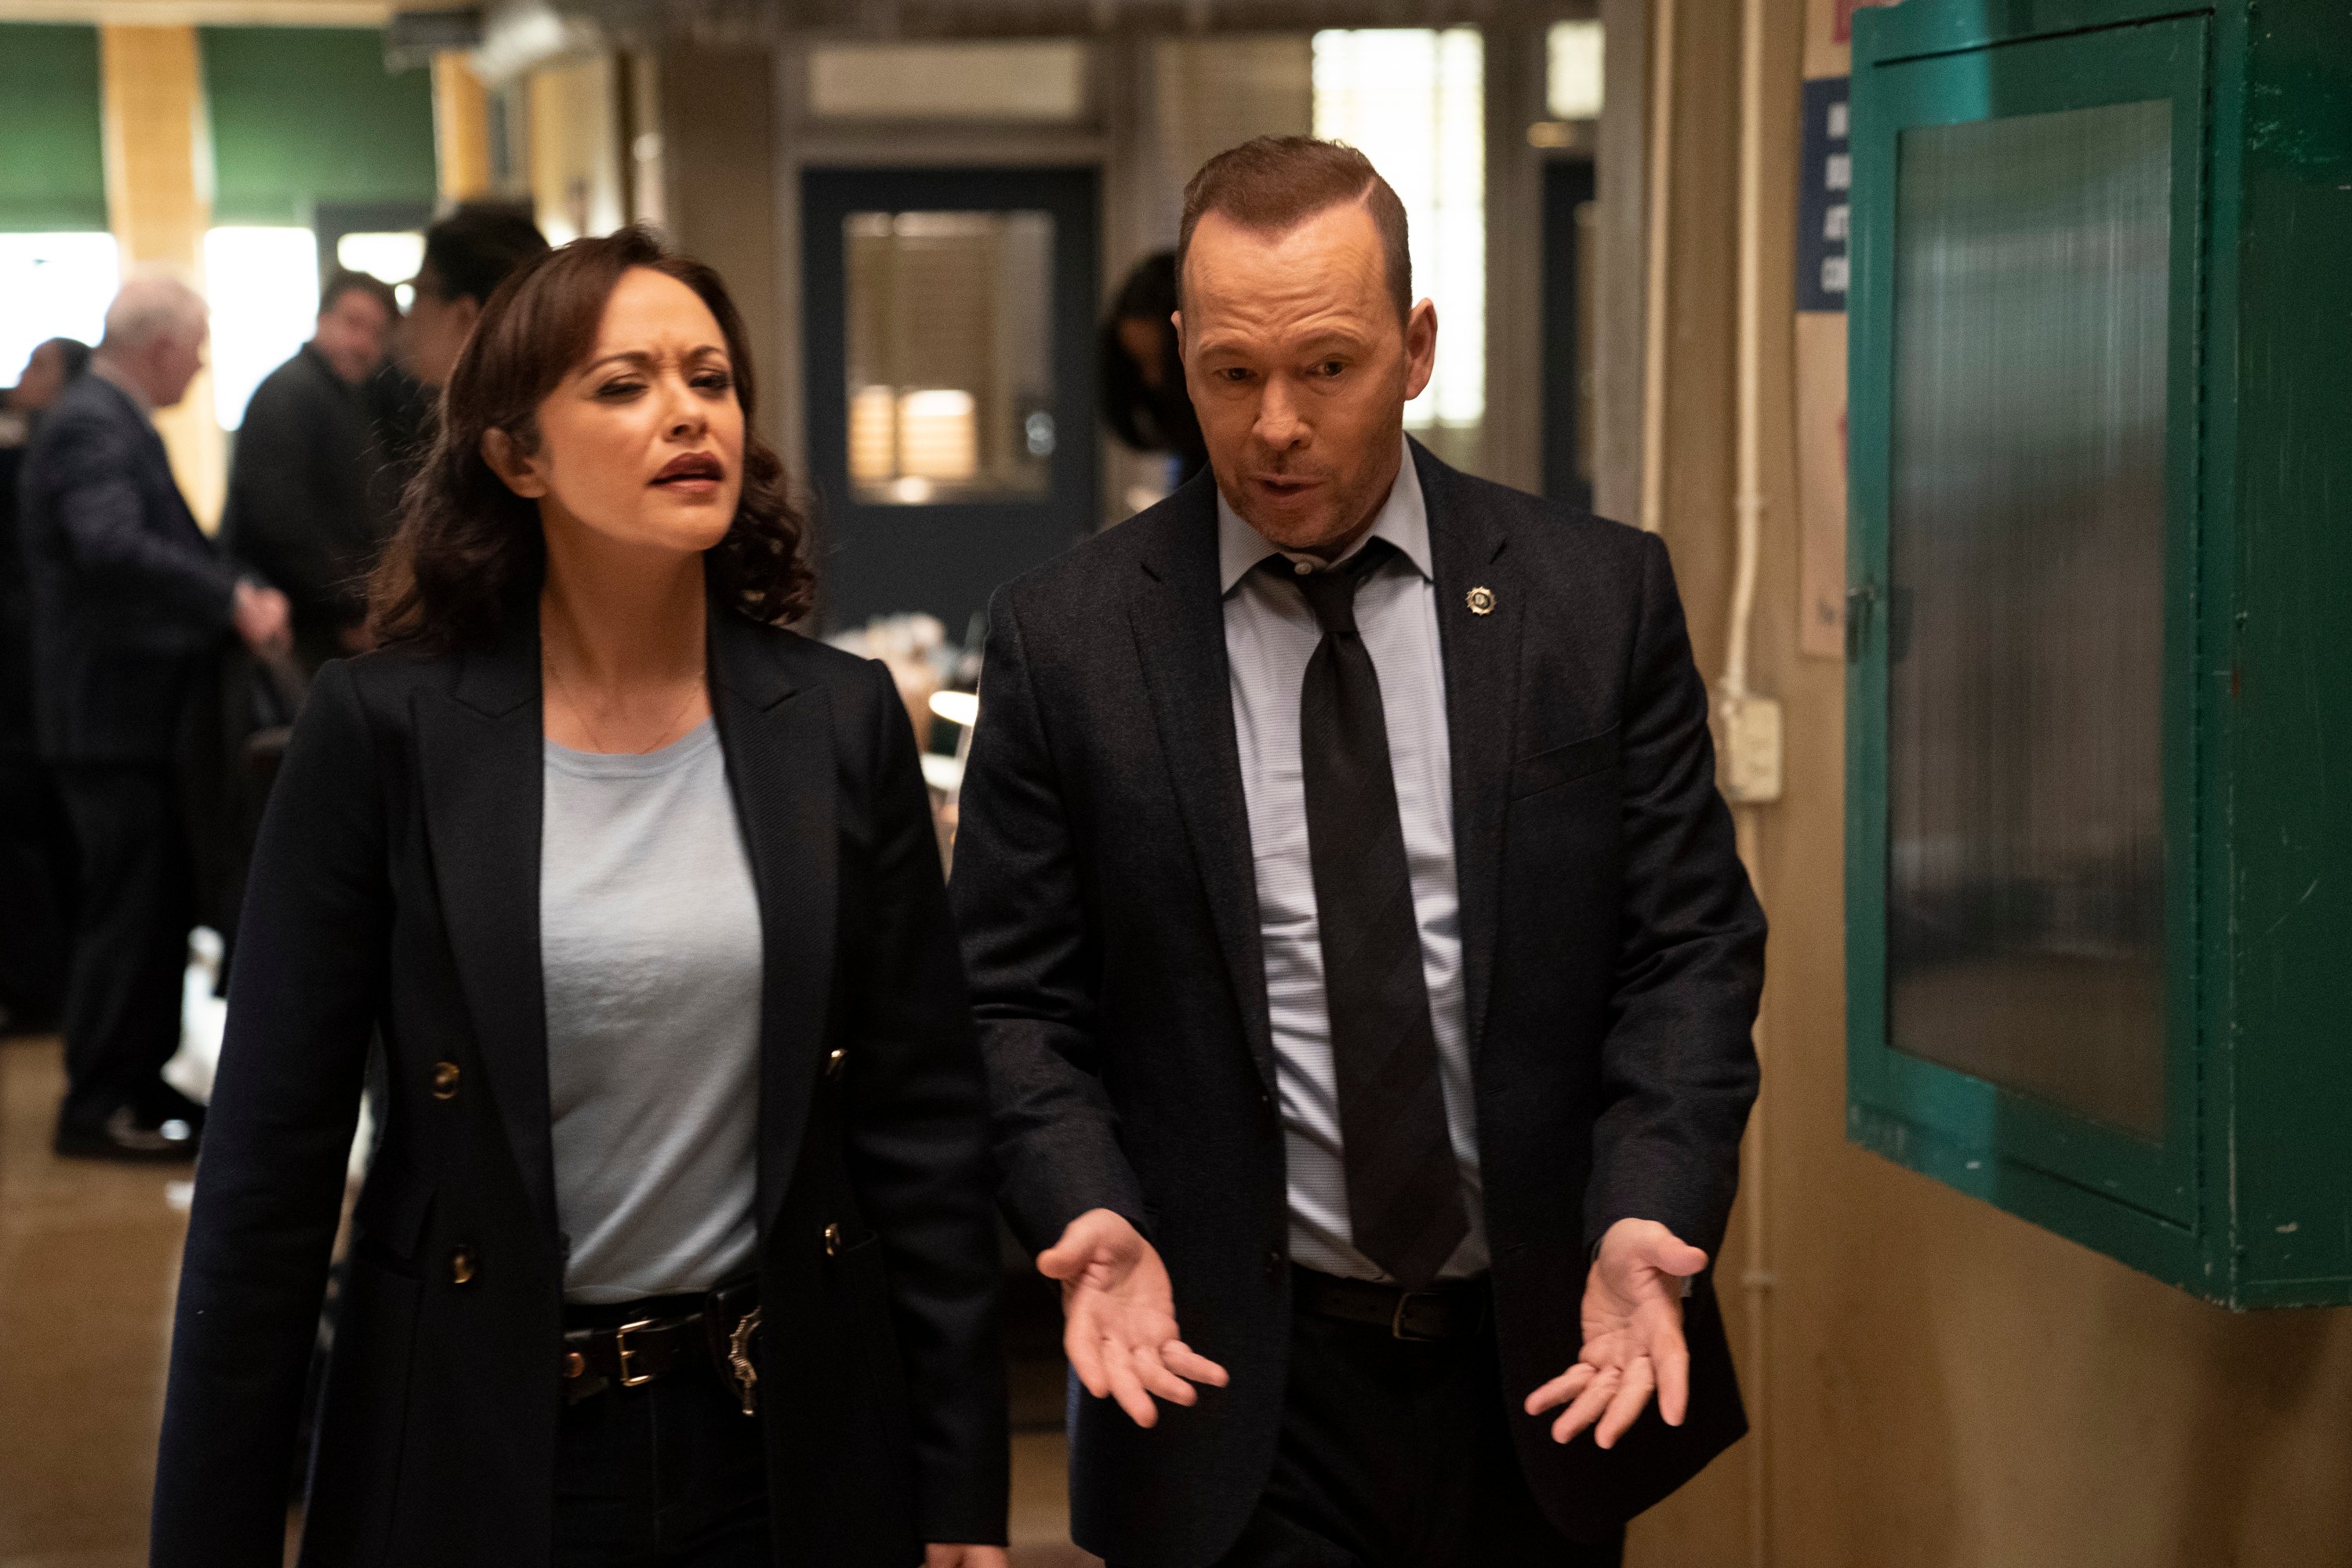 Marisa Ramirez and Donnie Wahlberg walk next to each other talking in a hallway on the set of 'Blue Bloods'